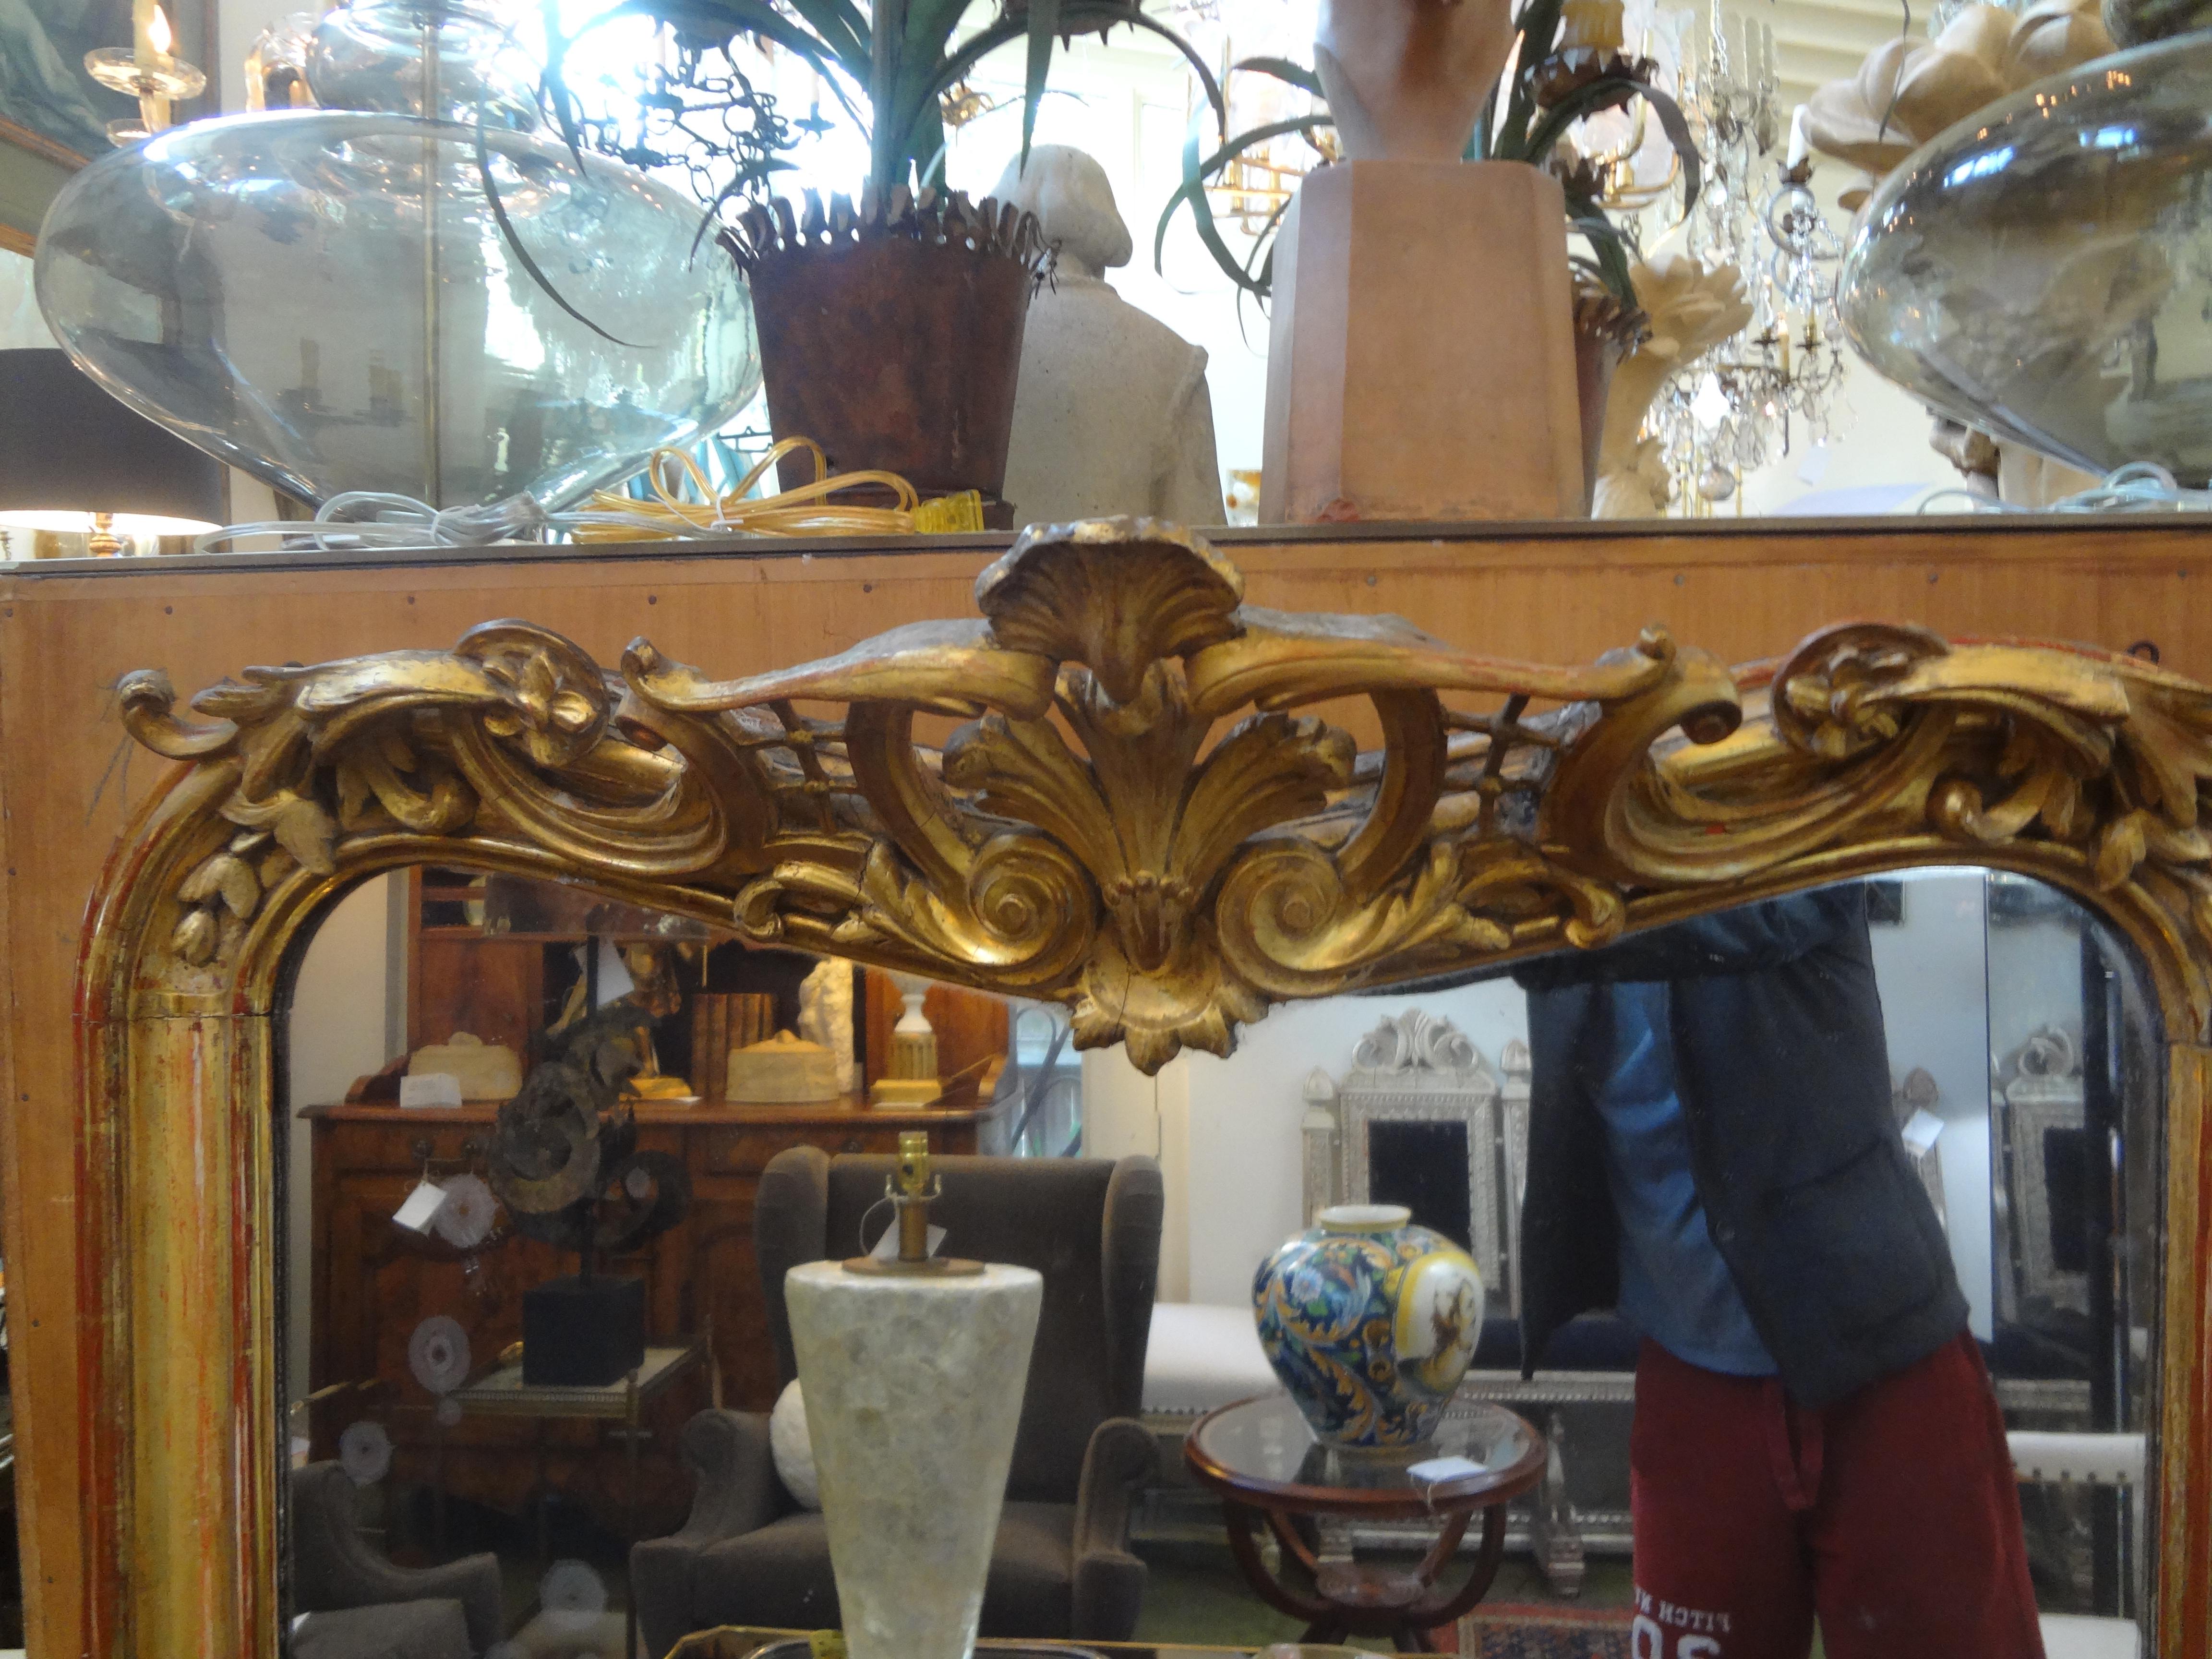 Gorgeous 19th century French Louis XV style giltwood mirror with a lovely cartouche at the top. This antique French full-length gilt mirror has fabulous patina and the back is as beautiful as the front! This stunning French gilt wood mirror would